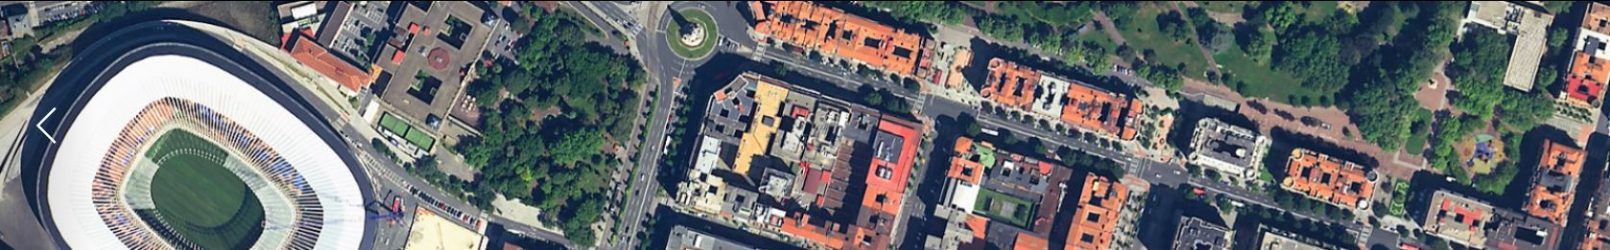 3D reconstruction of complex urban scenes using aerial imagery